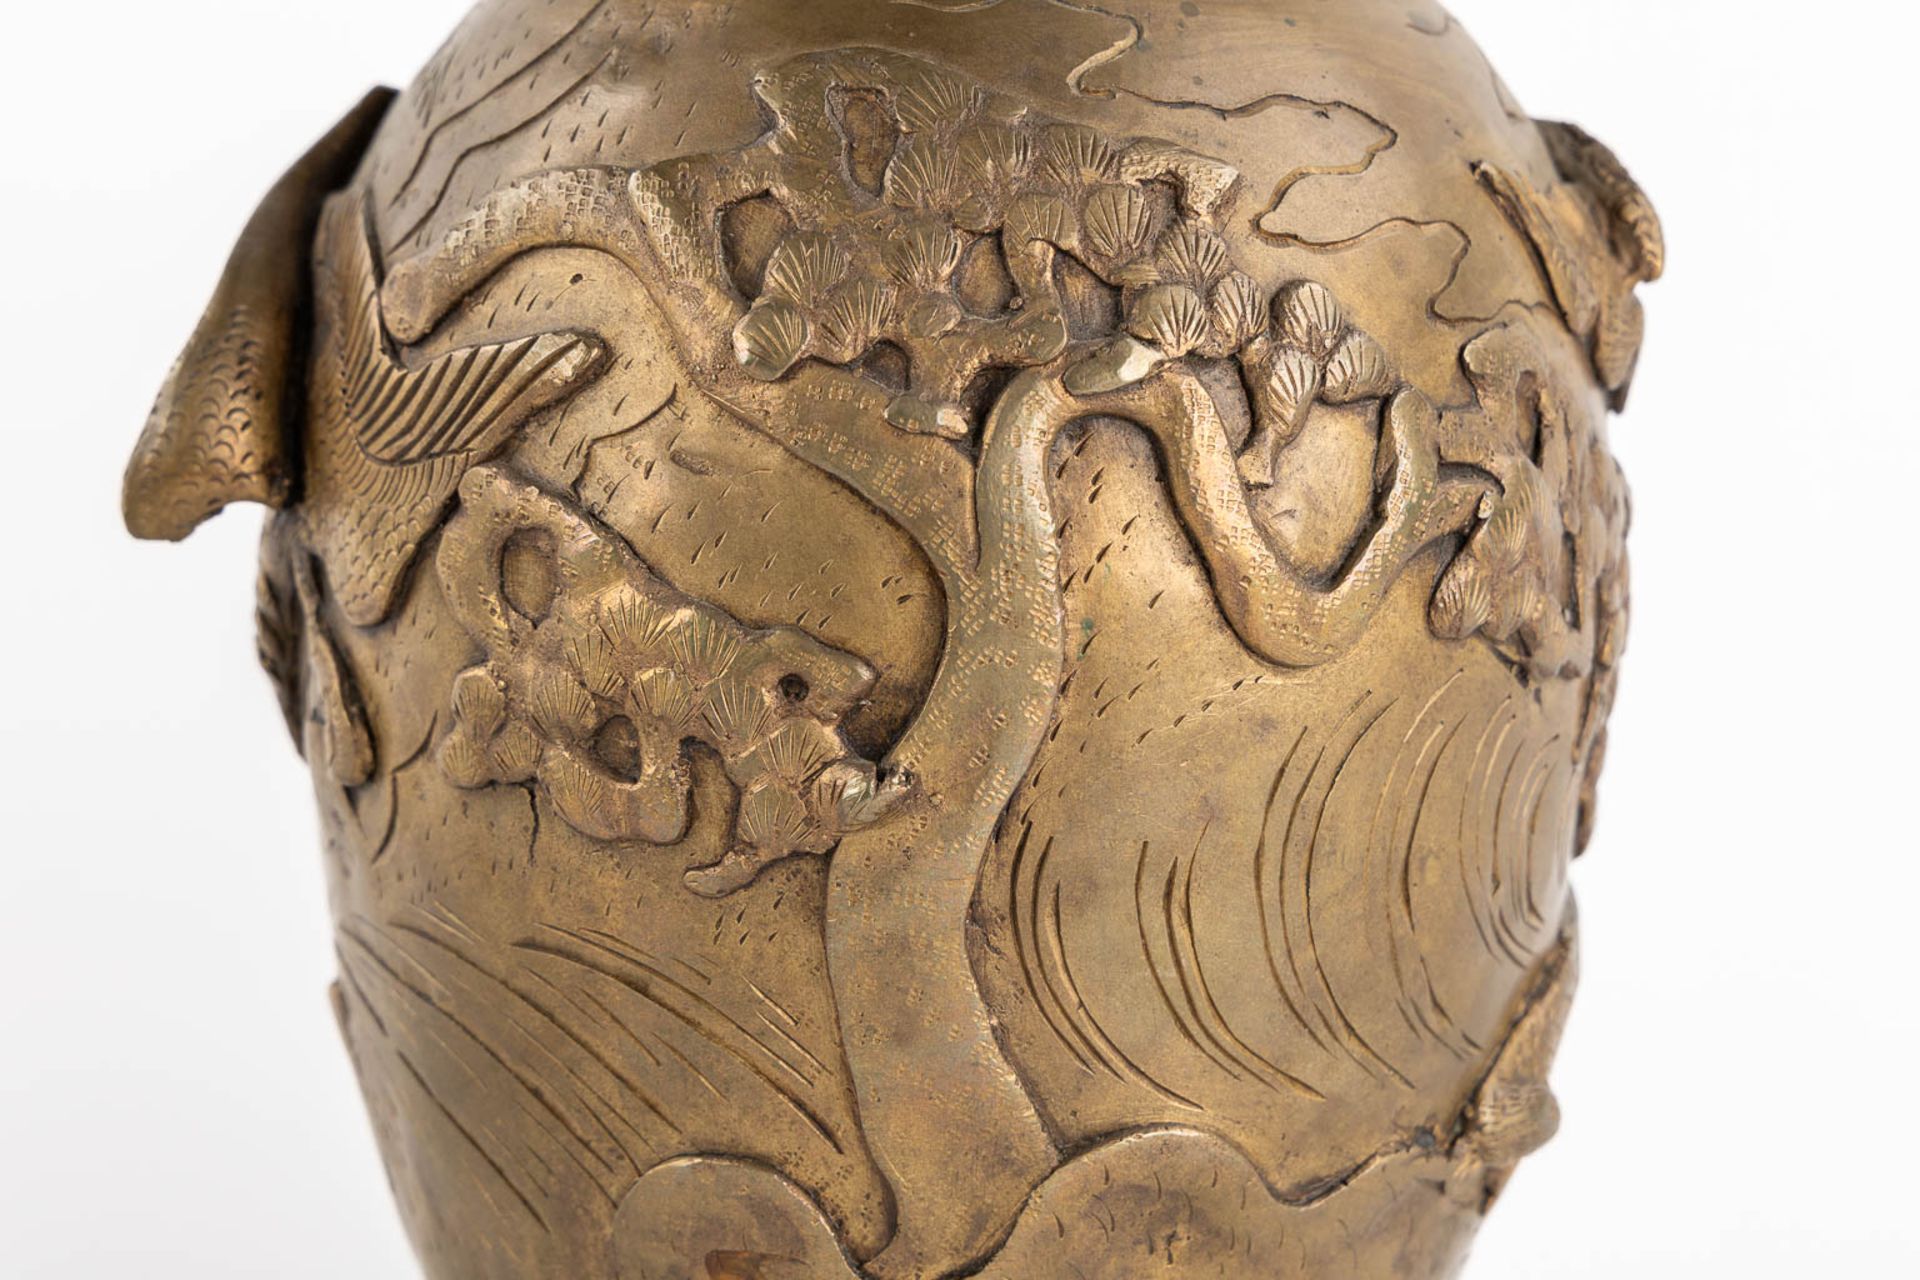 A pair of Oriental vases, depicting flying birds and trees. Patinated bronze. (H:27 x D:16 cm) - Image 13 of 16